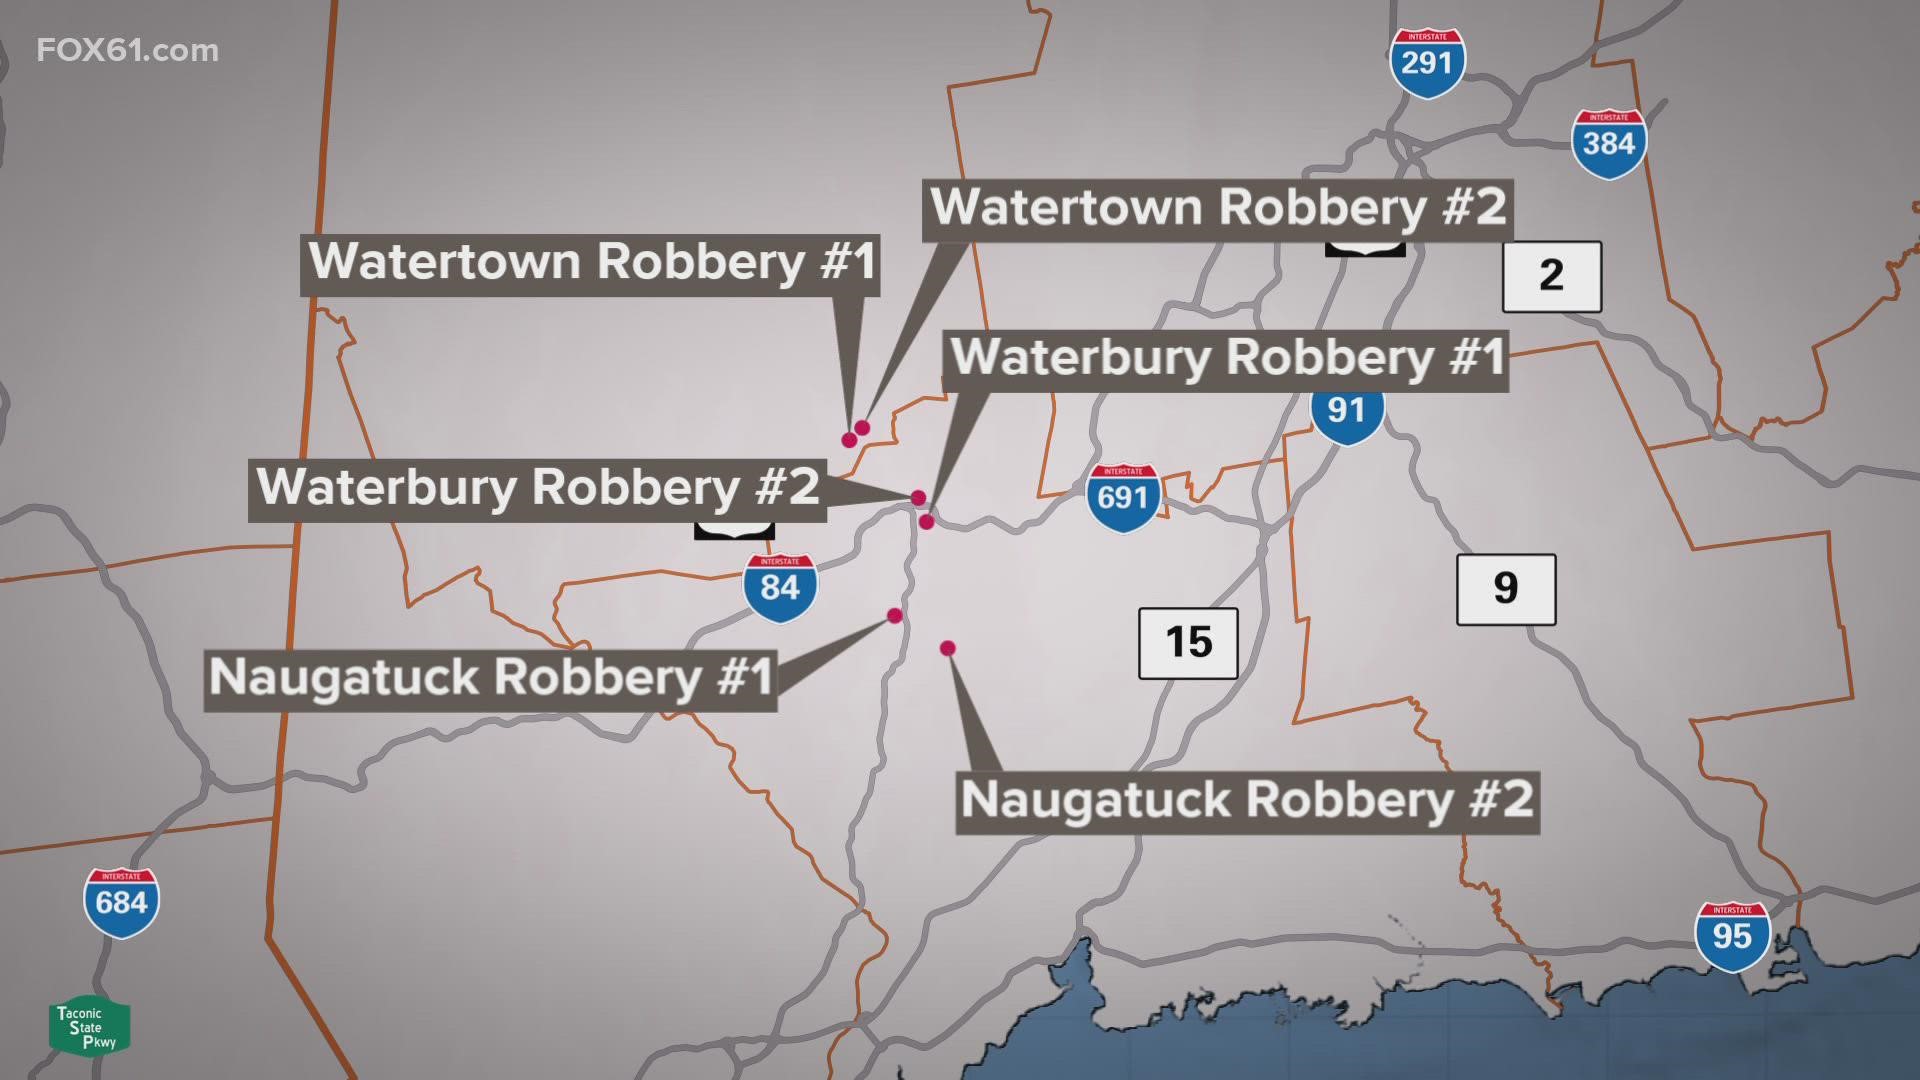 Two Naugatuck liquor stores, two Waterbury businesses, and two Watertown liquor stores have been robbed at gunpoint just hours apart from one another on Friday night